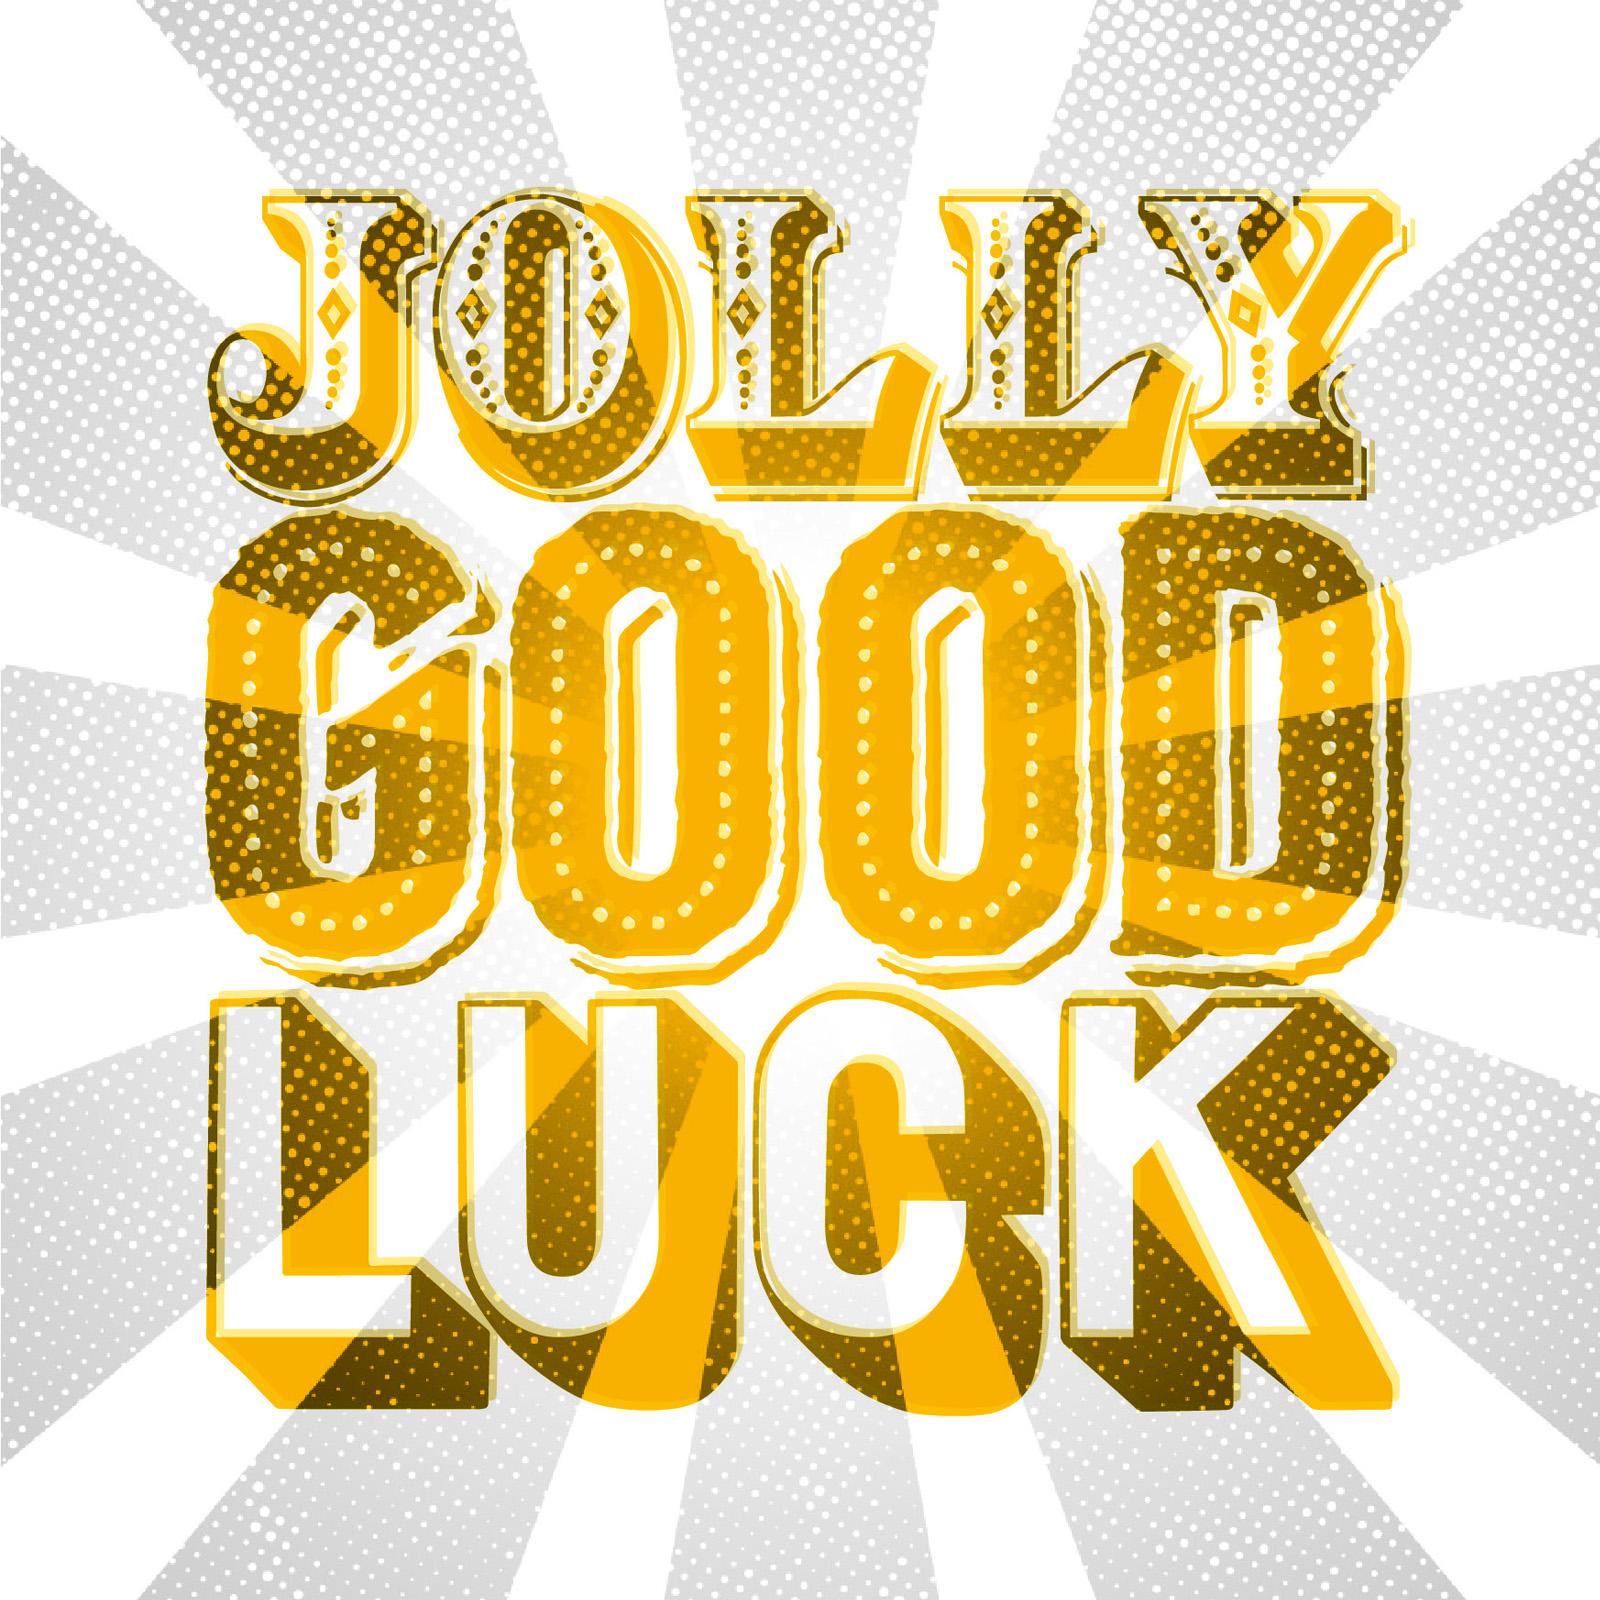 circus-style mix and match typography that reads jolly good luck in yellow with a grey-coloured distressed starburst background